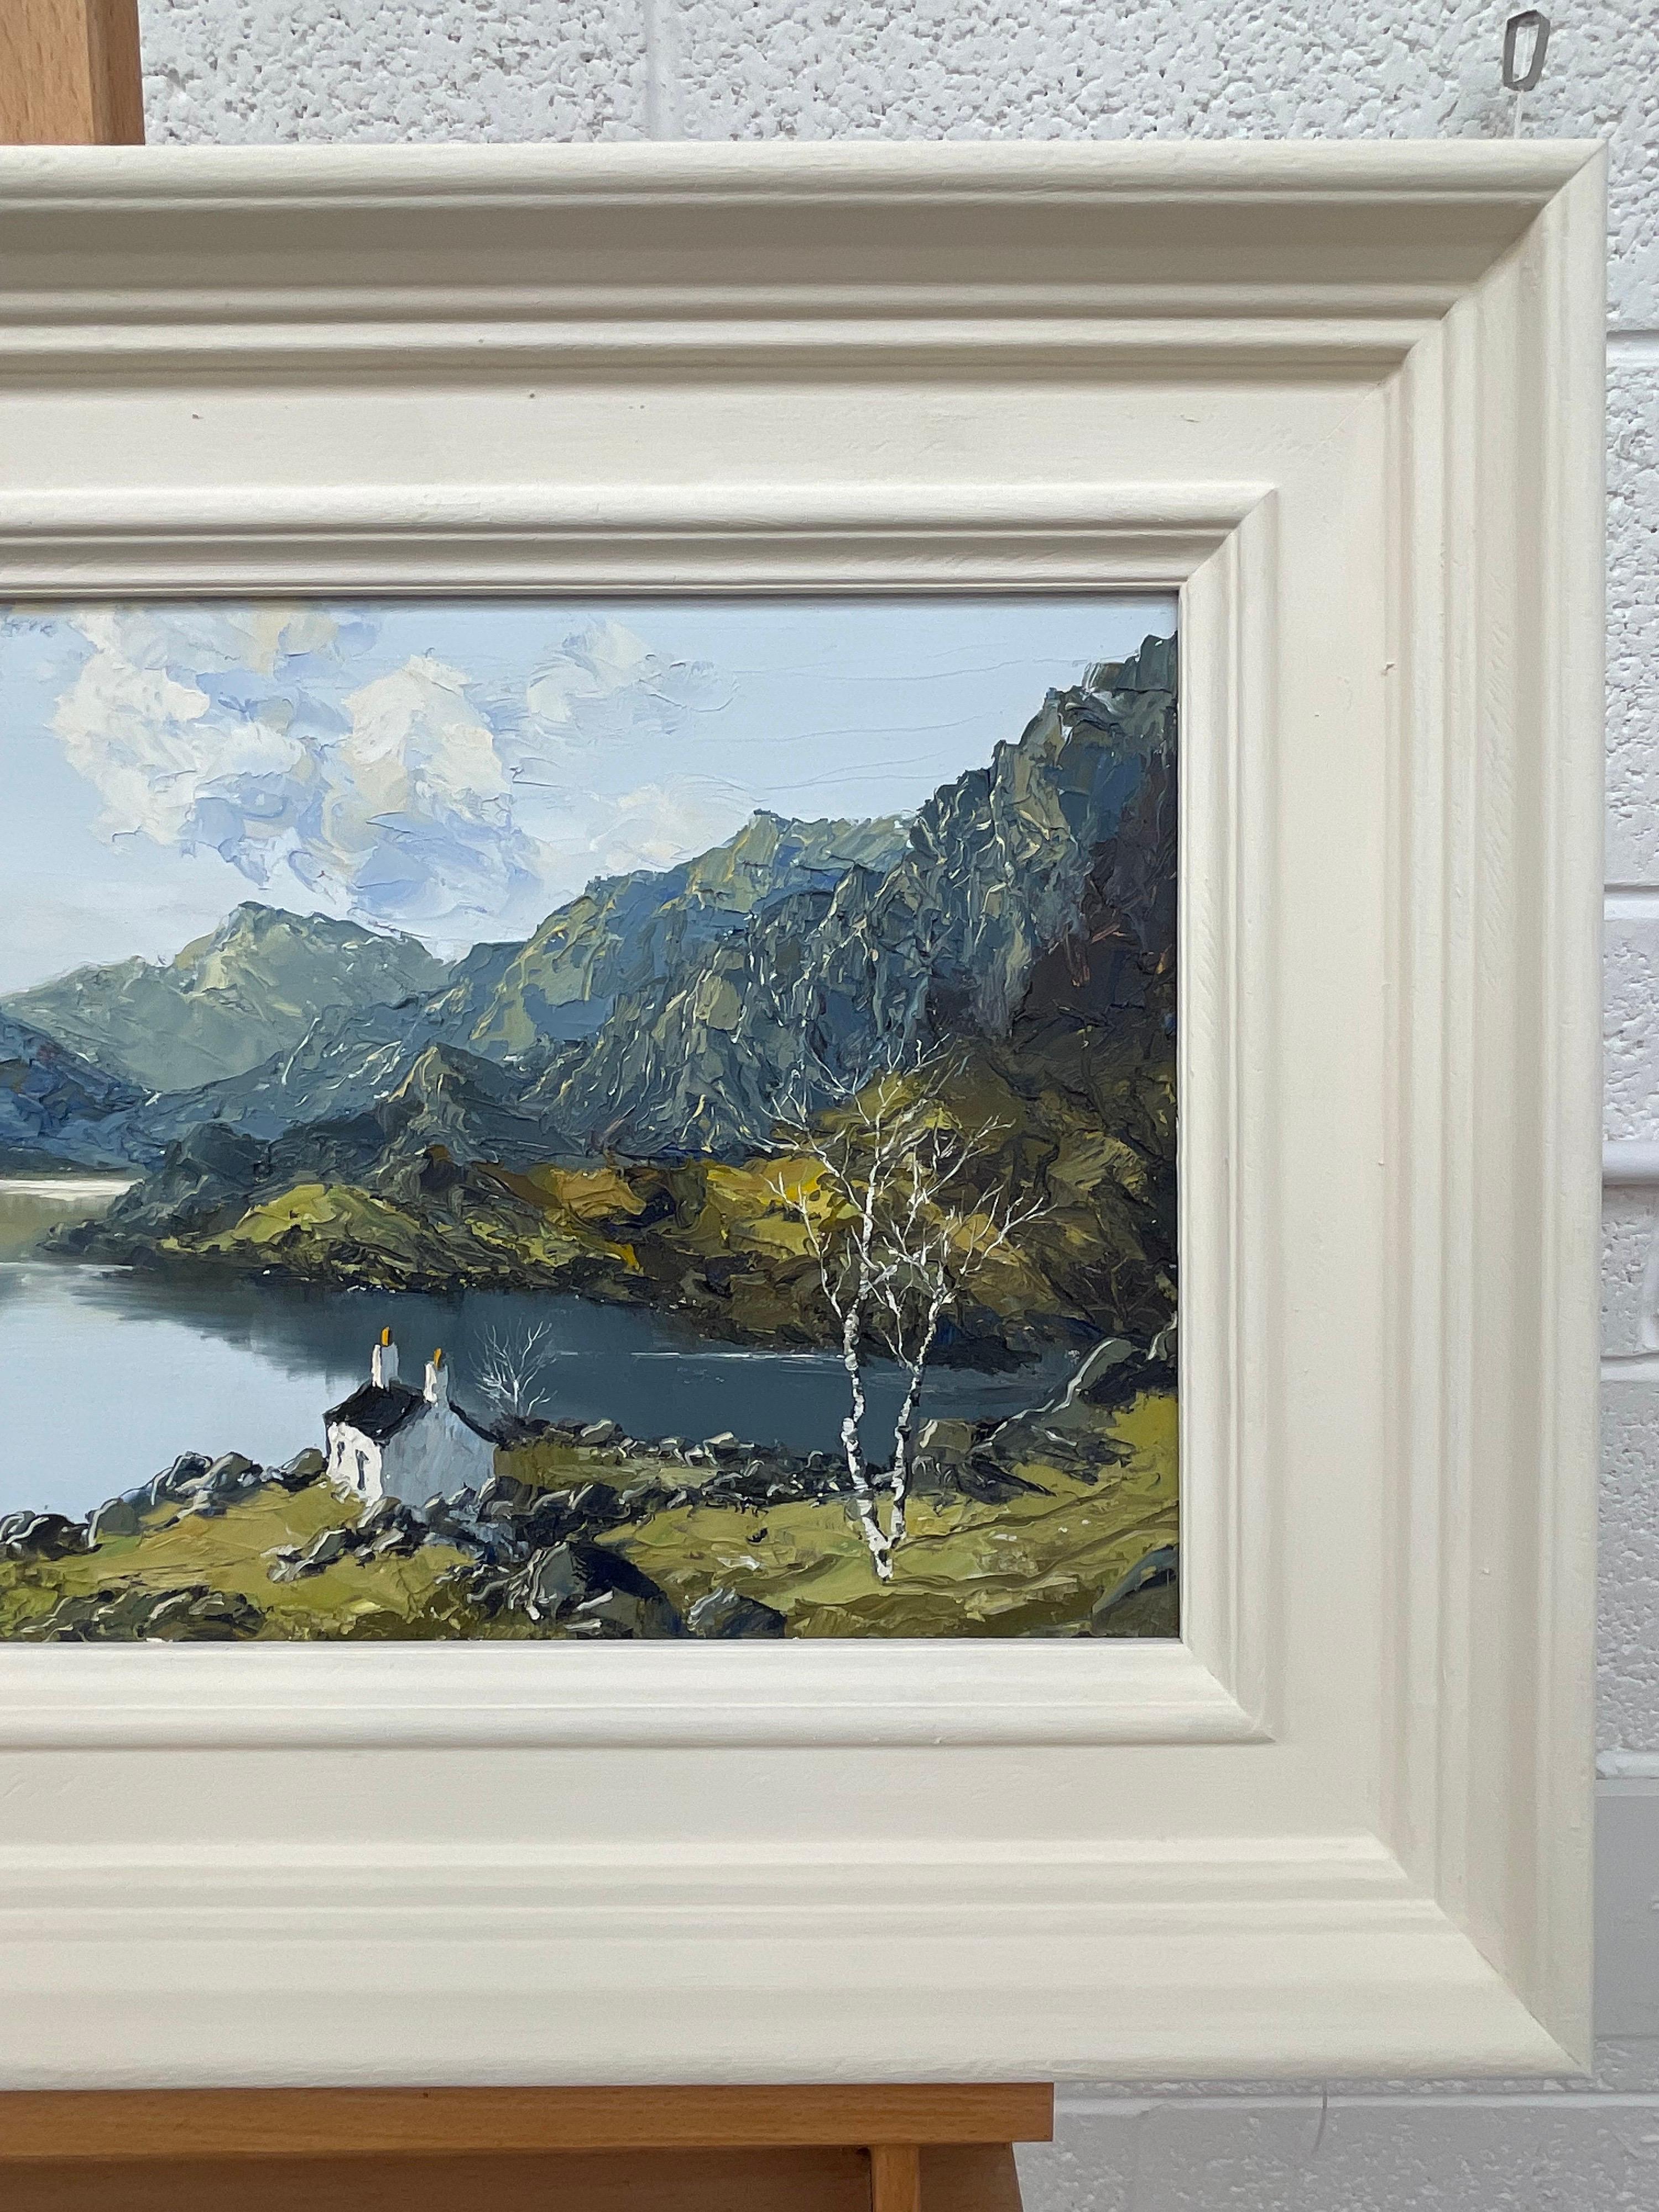 Vintage Impasto Oil Painting of River Mountain Scene in Wales by British Artist Charles Wyatt Warren (1908-1993)

Art measures 21 x 9 inches 
Frame measures 26 x 14 inches 

Charles Wyatt Warren (1908-1993) was a self-taught painter and an